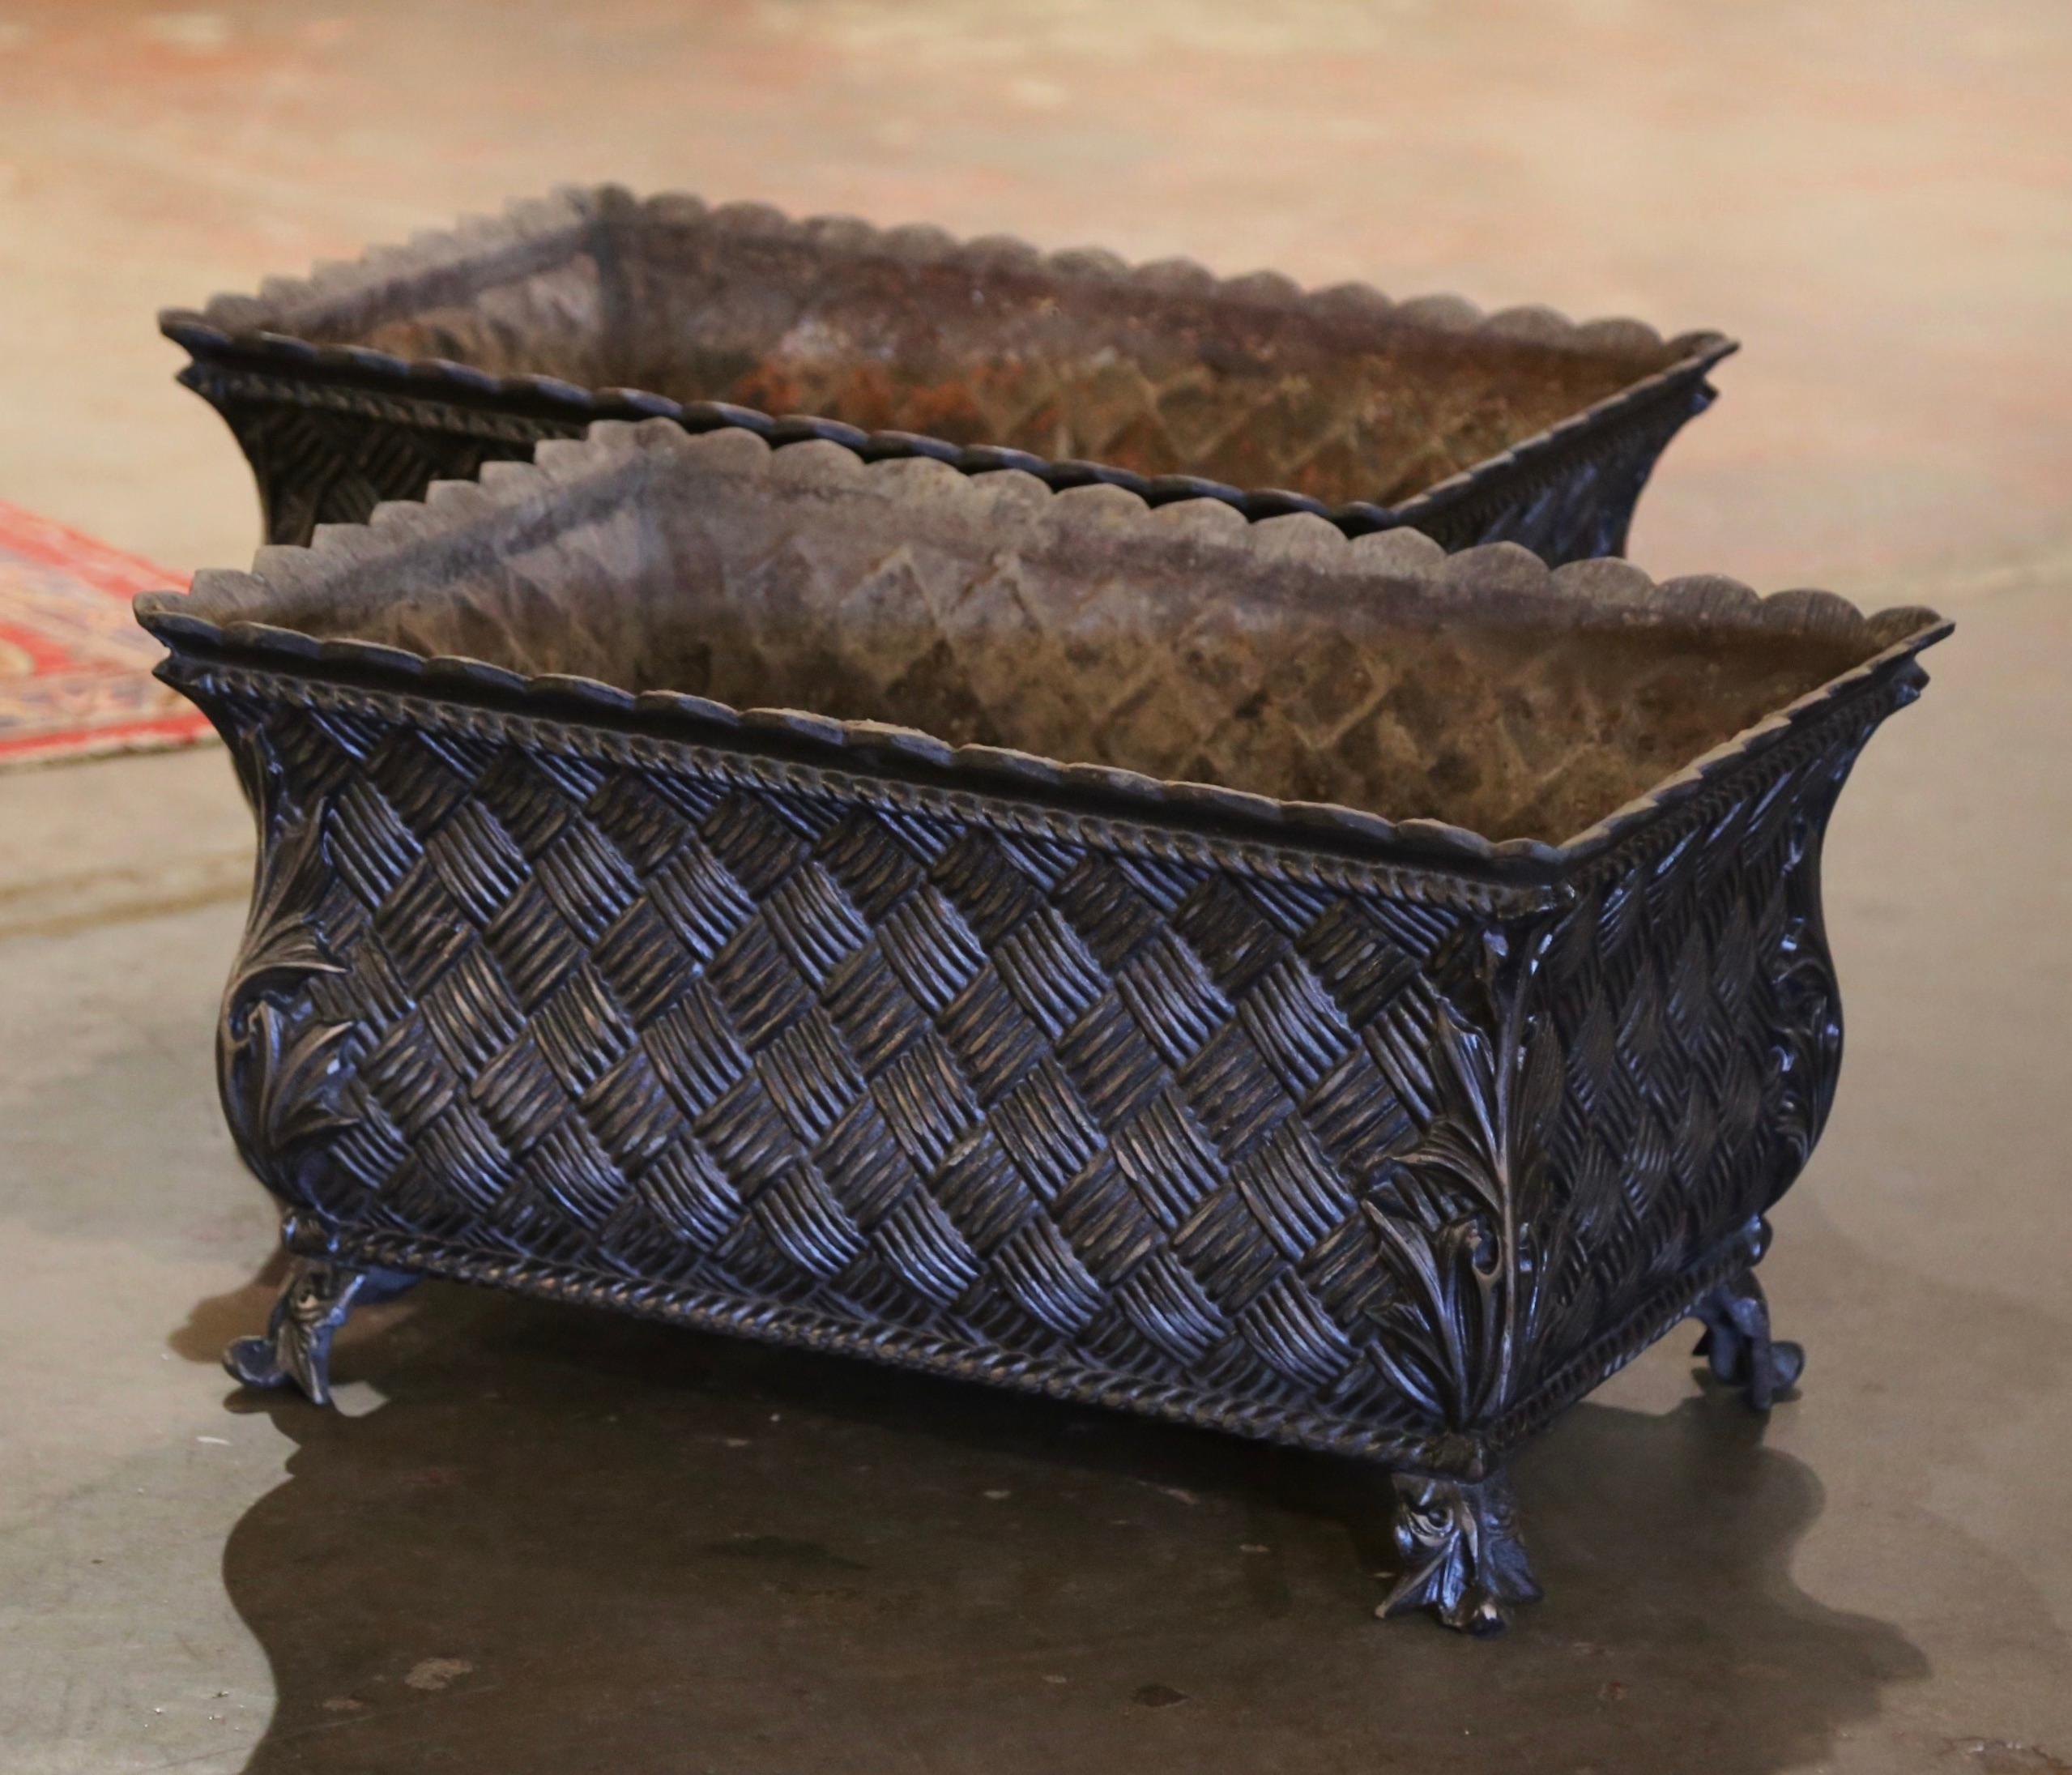 Stage your backyard or garden with this elegant pair of antique planters. Crafted in France circa 1850 and rectangular in shape, each jardinière stands on small feet decorated with acanthus leaf motifs at the shoulder, over a bombe and serpentine